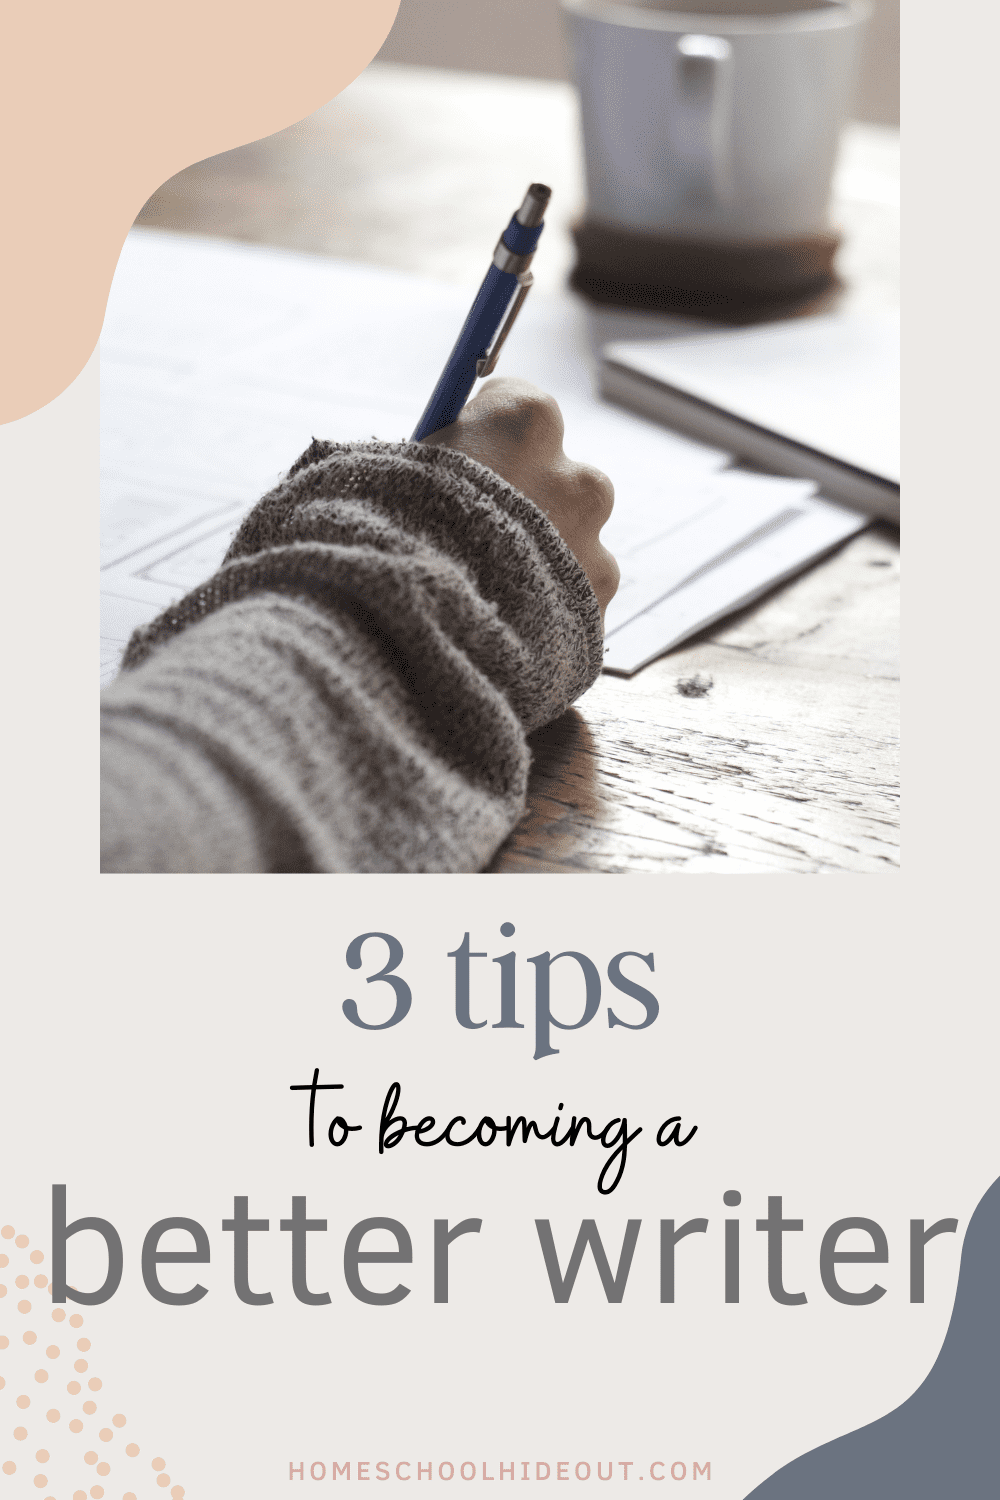 I am loving these tools to become a better writer. #3 is my favorite.